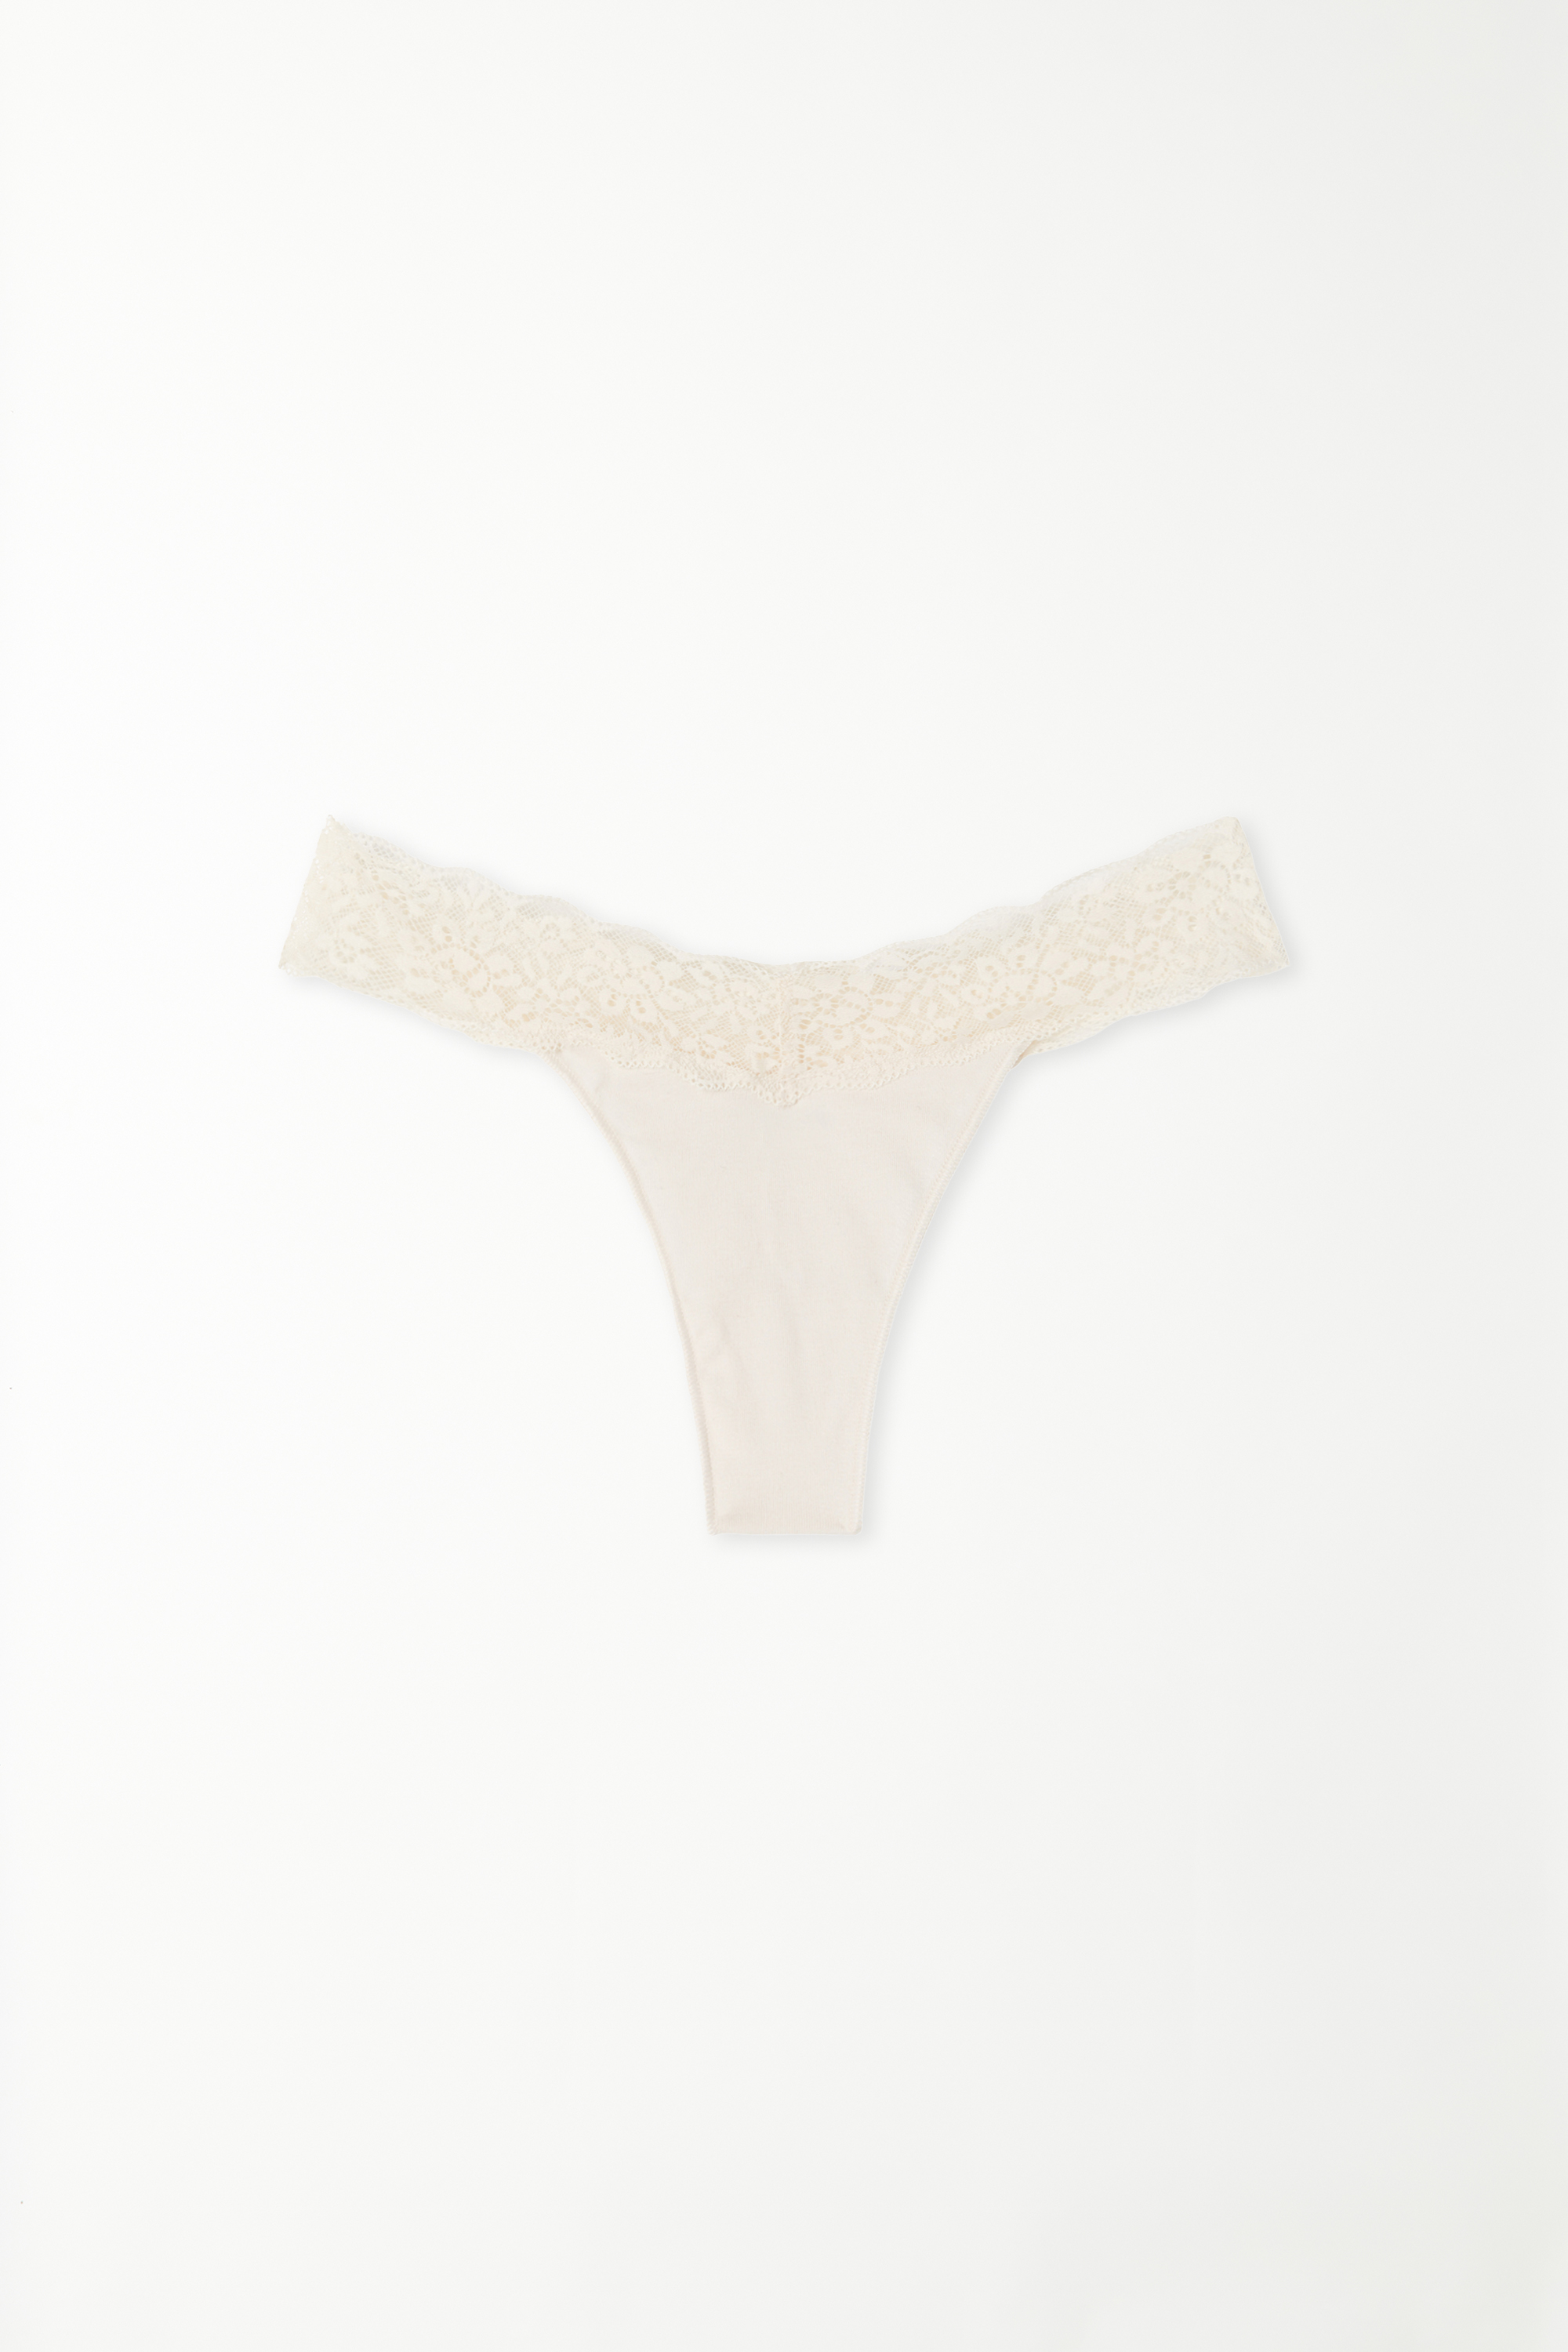 Recycled Cotton and Lace Brazilian Panties